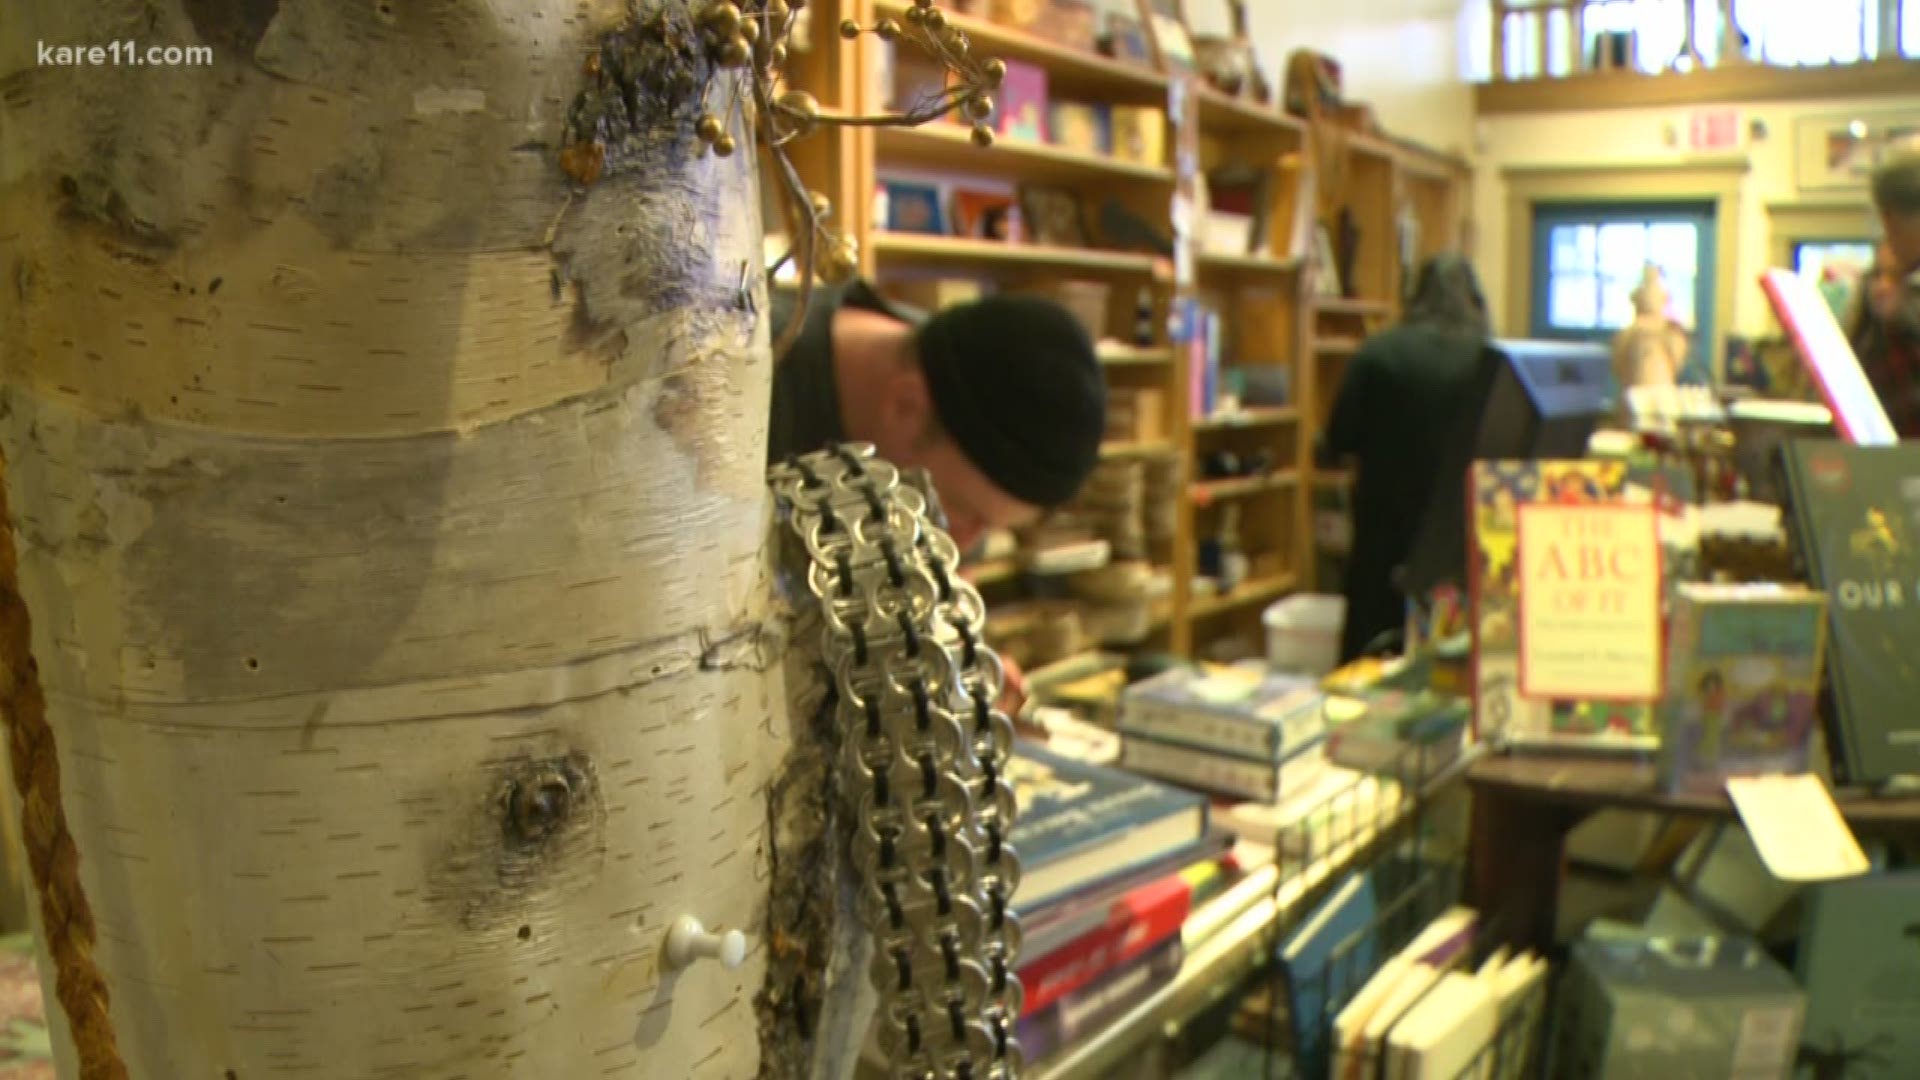 In the Twin Cities, nearly 20 independent bookstores are participating in the Twin Cities Independent Bookstore Passport. One of the independent bookstores participating in Saturday's celebrations is Birchbark Books and Native Arts. Acclaimed author Louise Erdrich opened Birchbark Books in 2001.